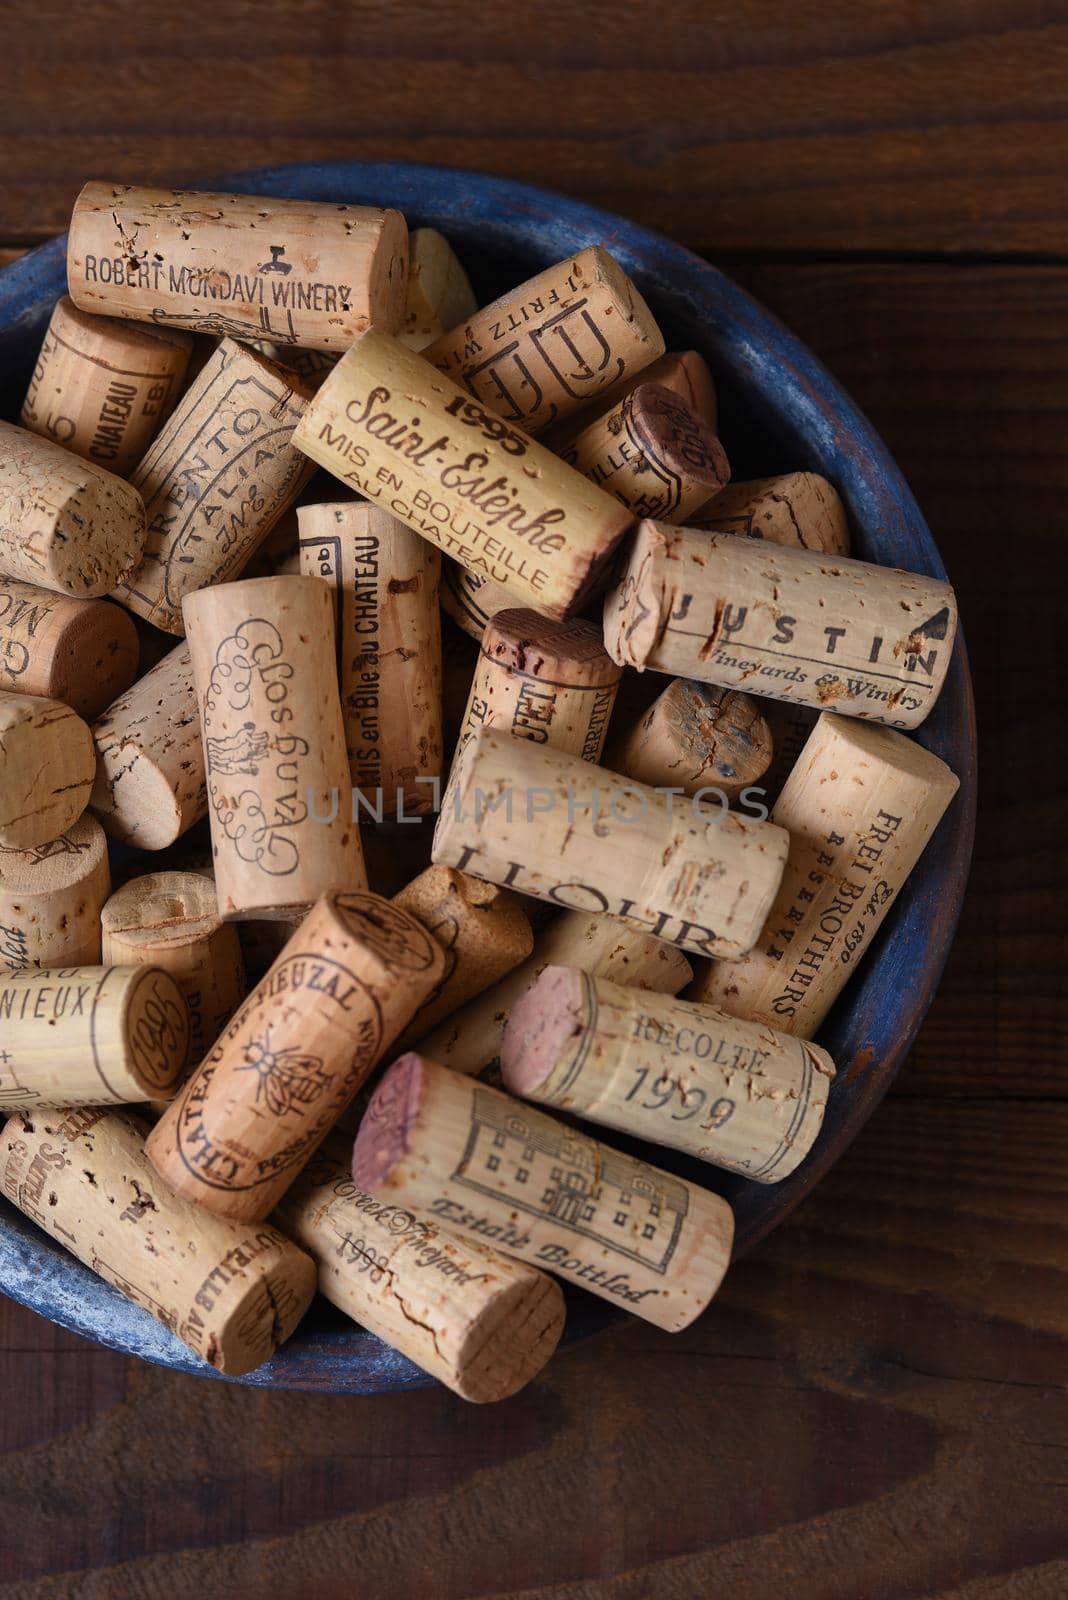 IRIVNE, CALIFORNIA - 26 JAN 2020: High angle closeup of a group of branded wine corks in a bowl from domestic and foreign wineries.